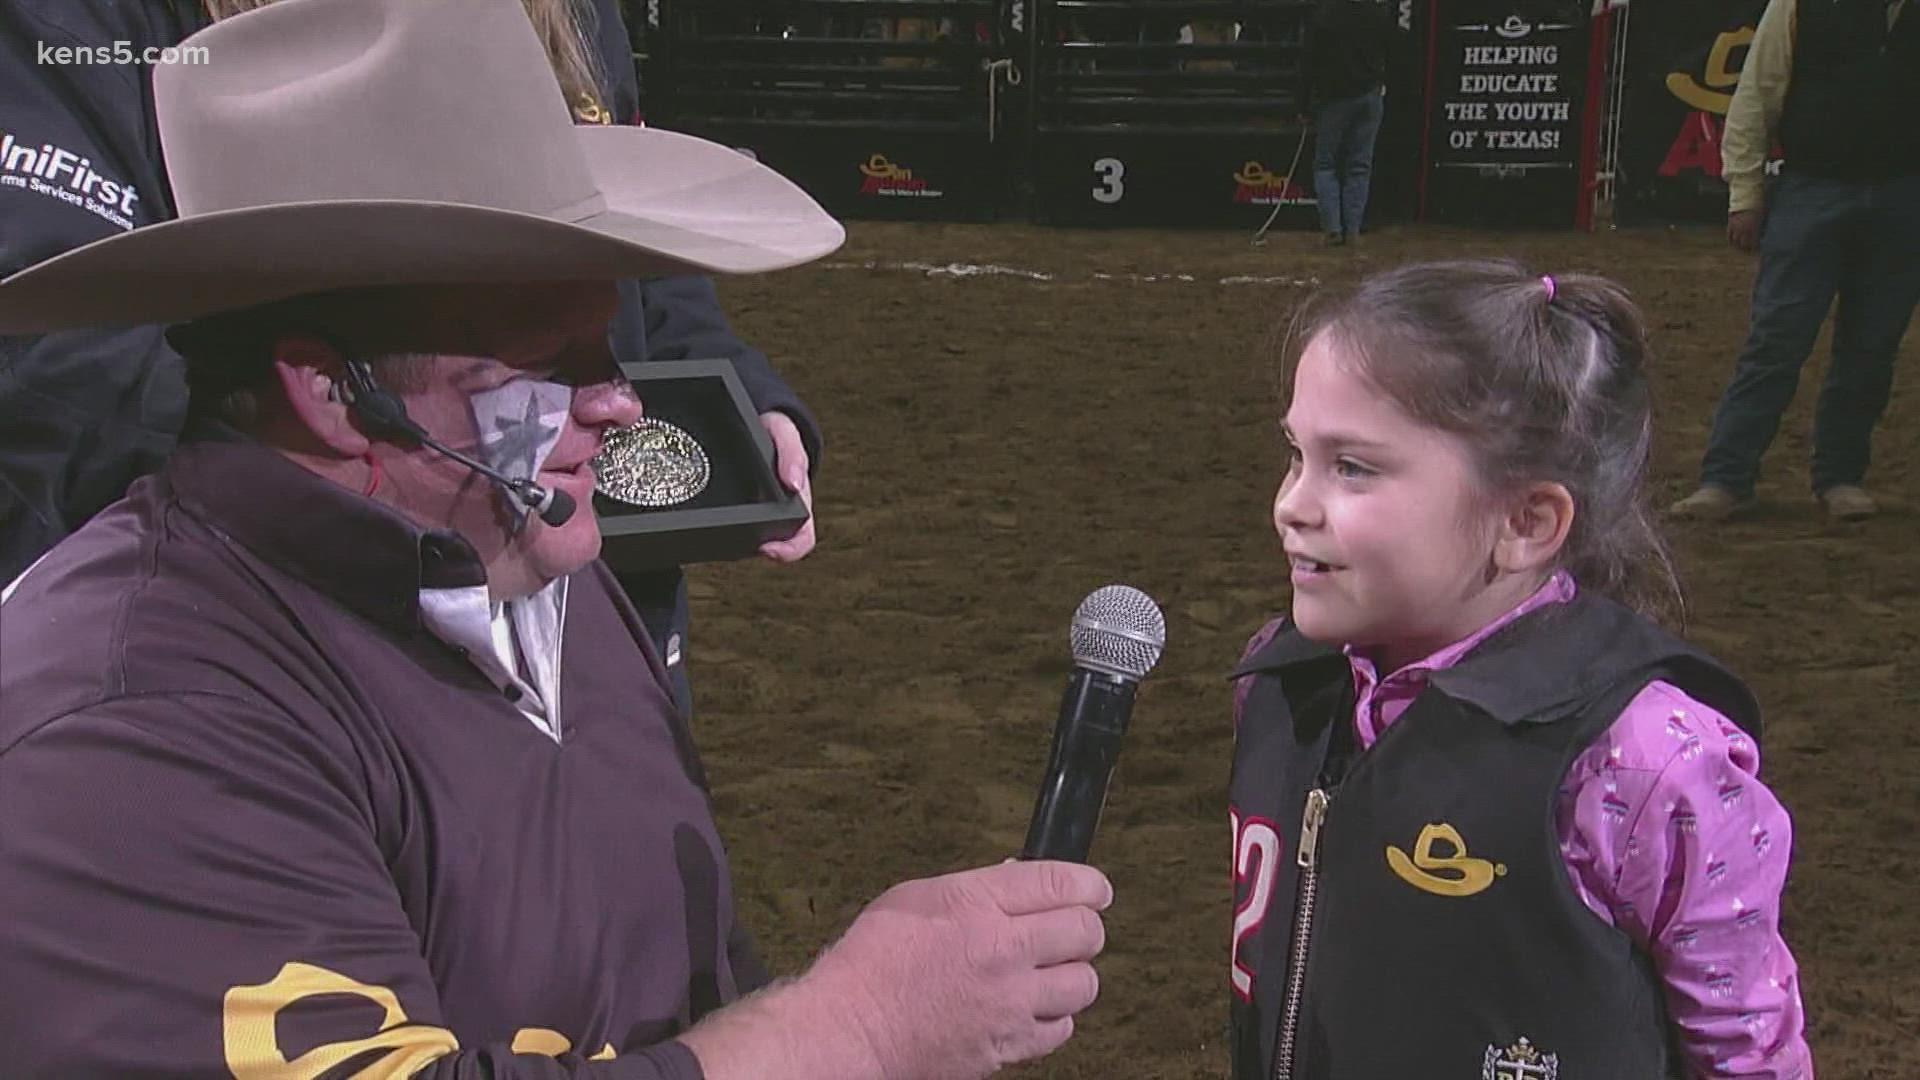 She scored 90 points to win the mutton bustin competition.